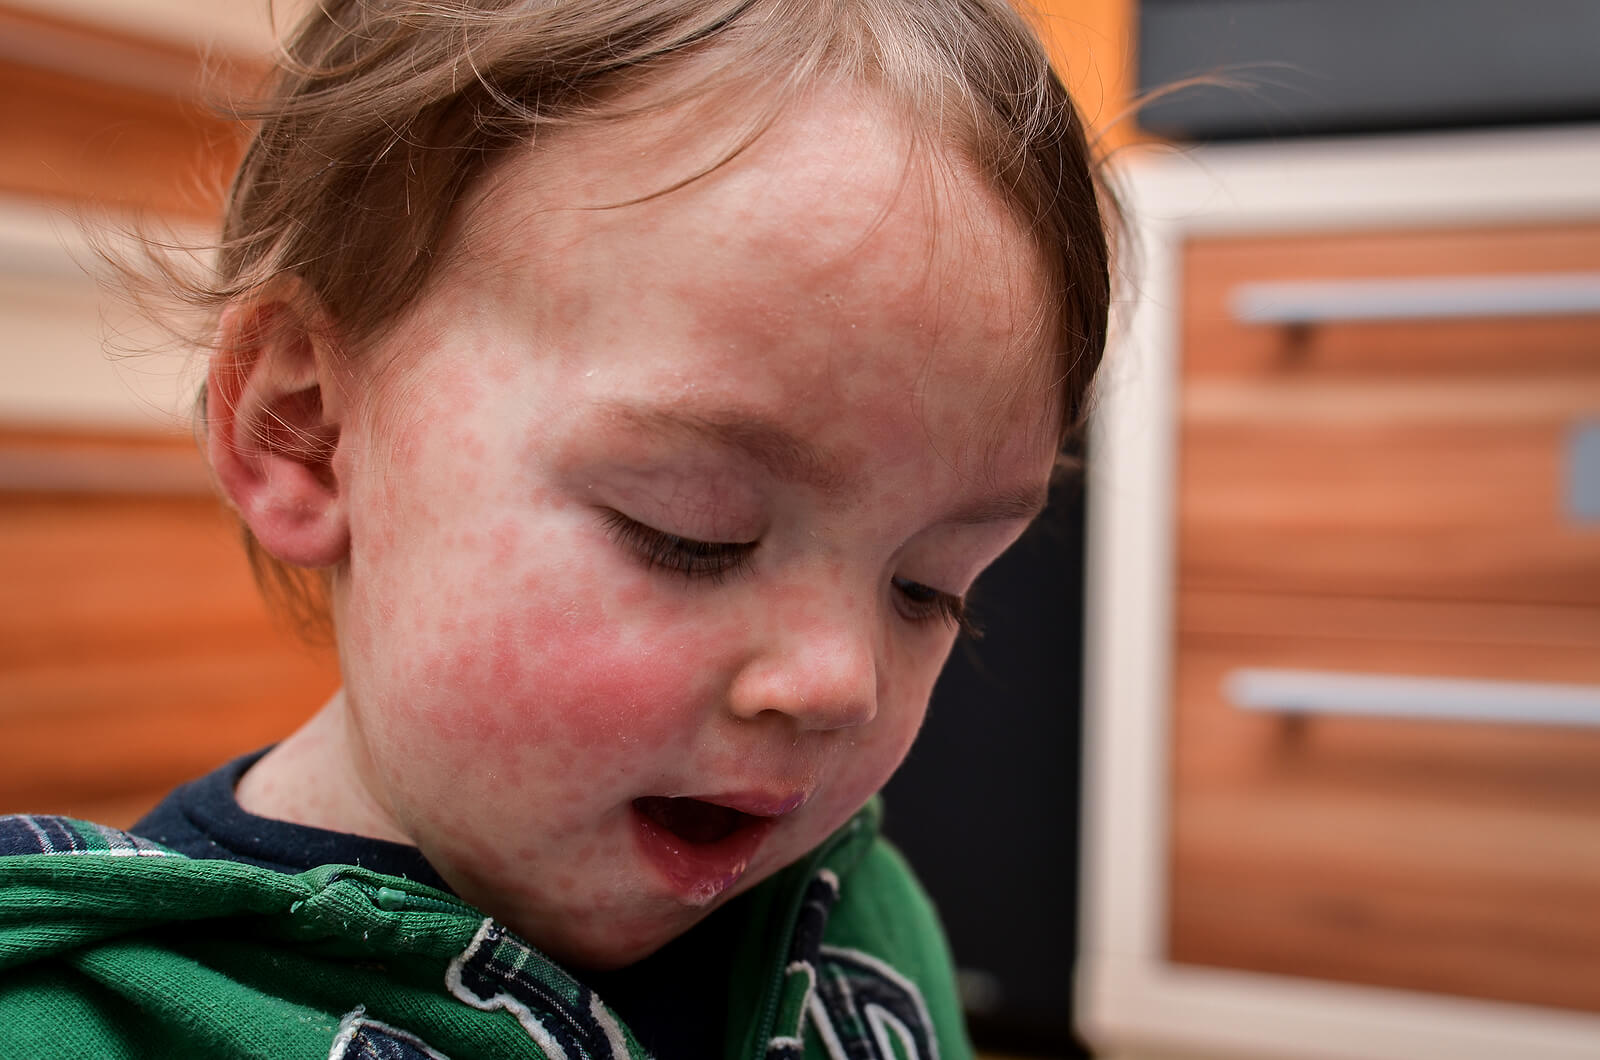 A child with a skin allergy on his face.